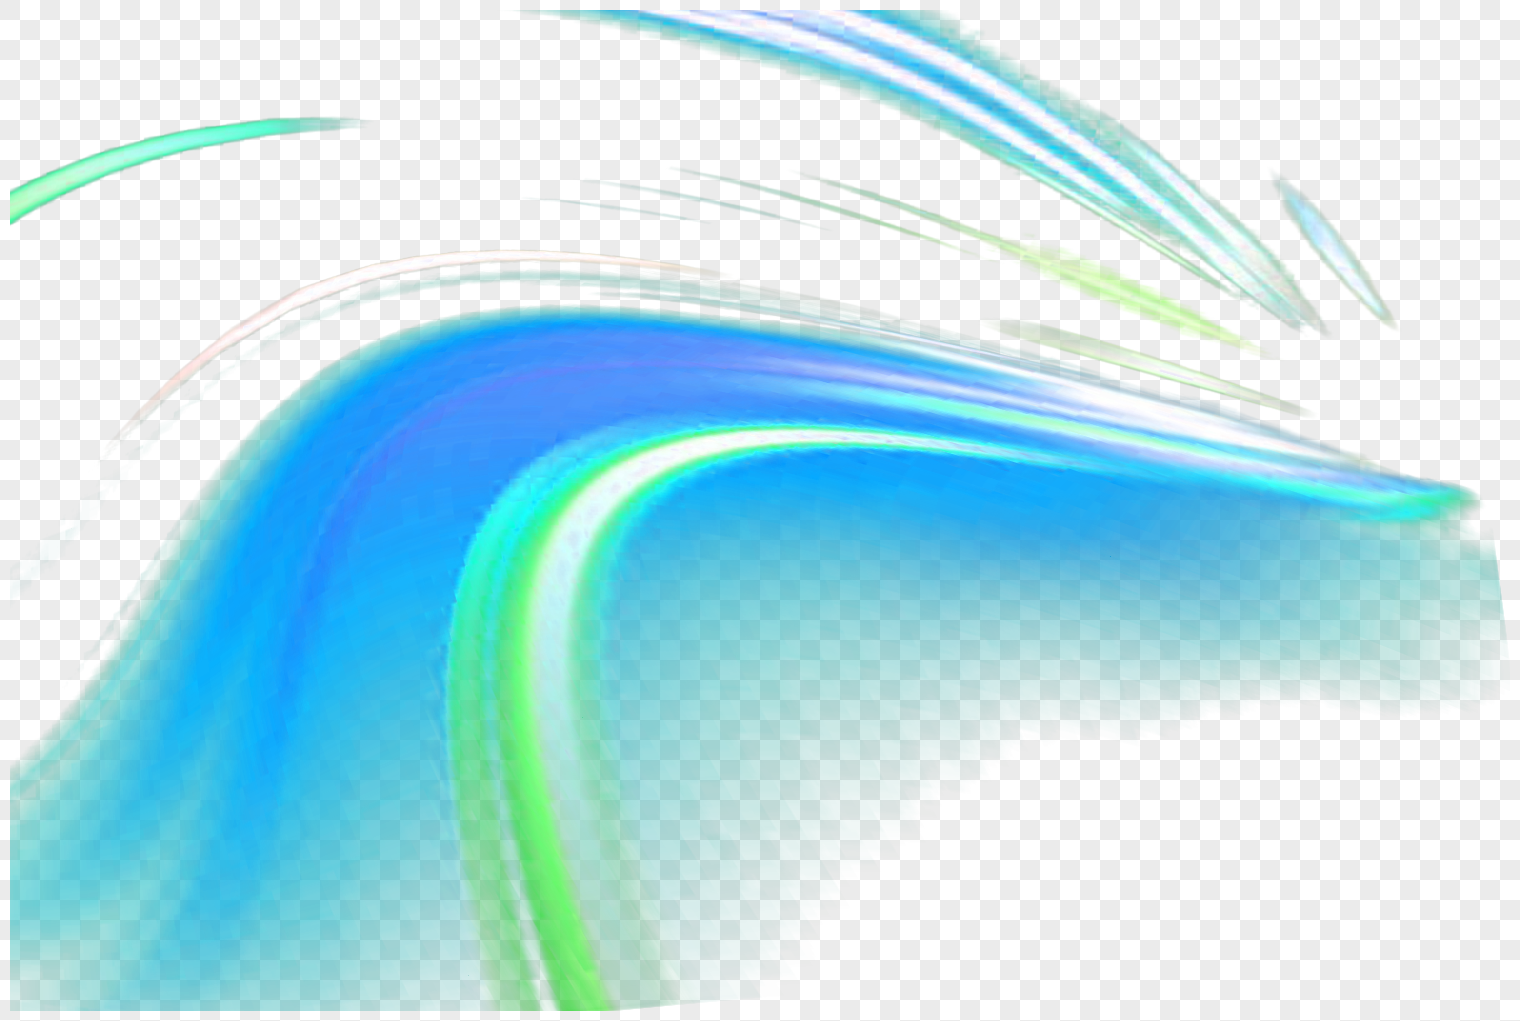 FREE DOWNLOAD Aurora PNG Transparent Background, Pxpng